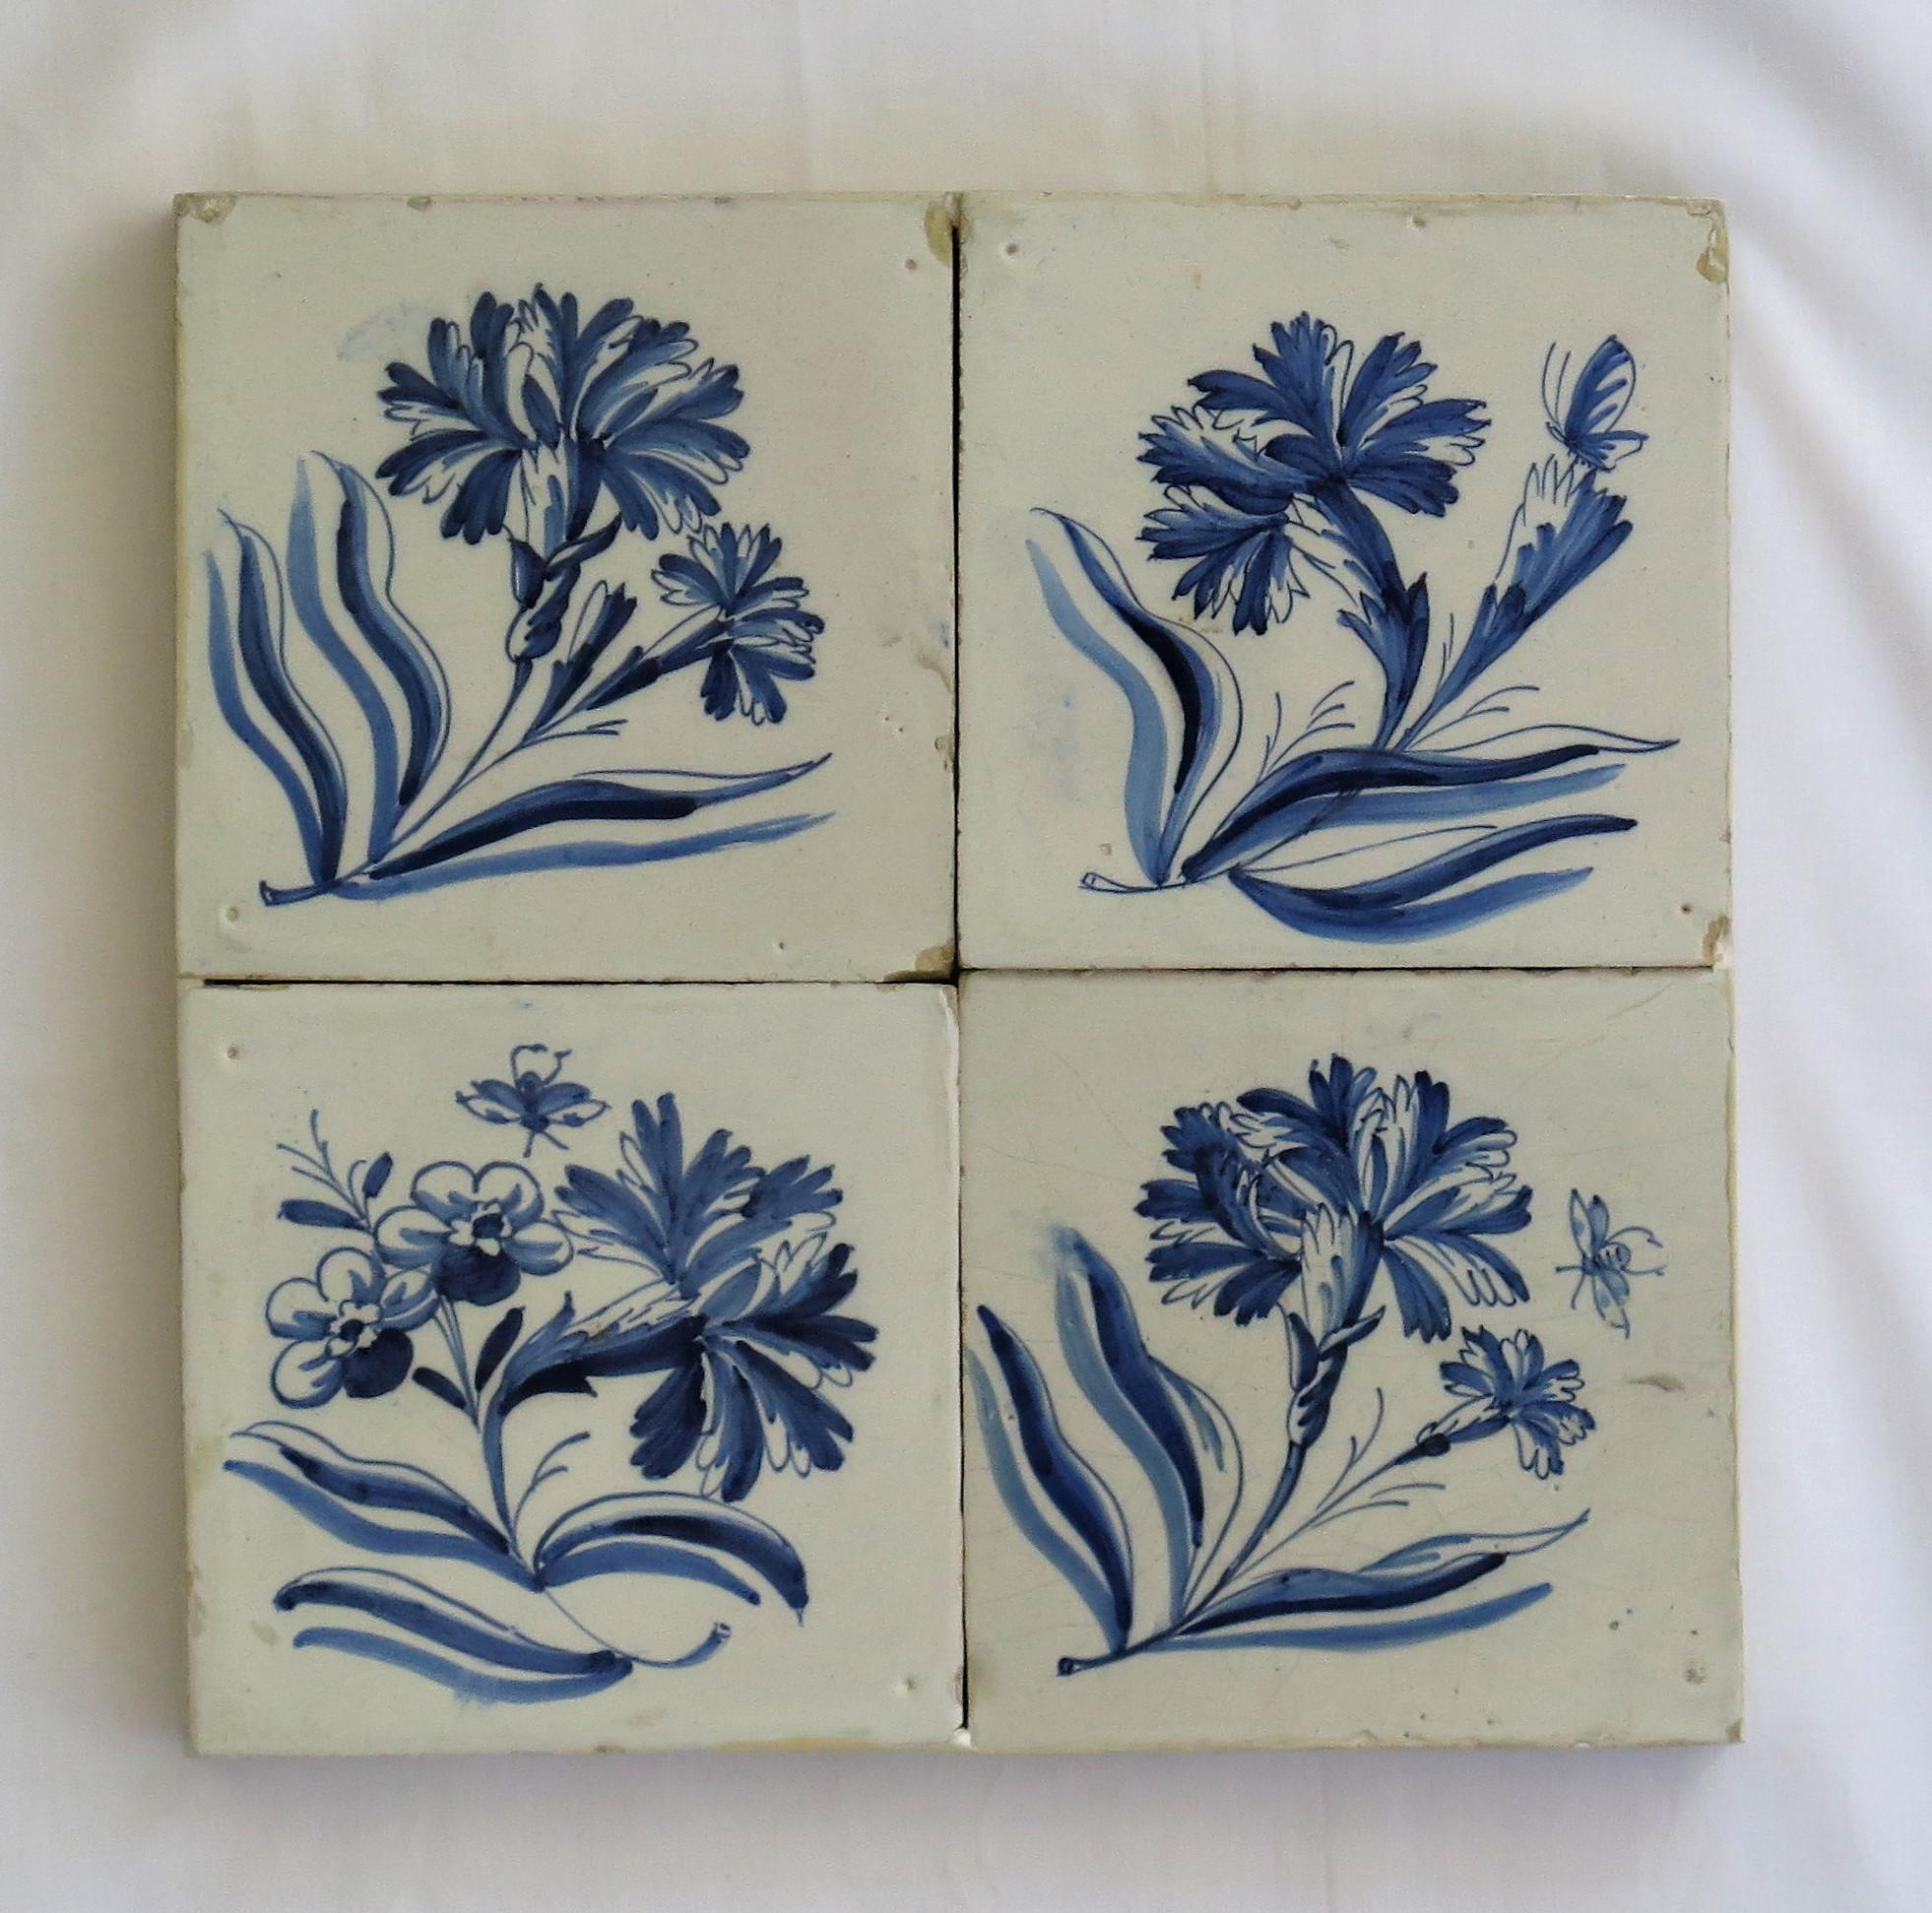 These are Four Delft ceramic wall tiles mounted on a modern wood frame, all with a blue and white hand painted flower pattern, made in the Netherlands during the 17th century, circa 1680.

Each tile is nominally 5 inches square with the display